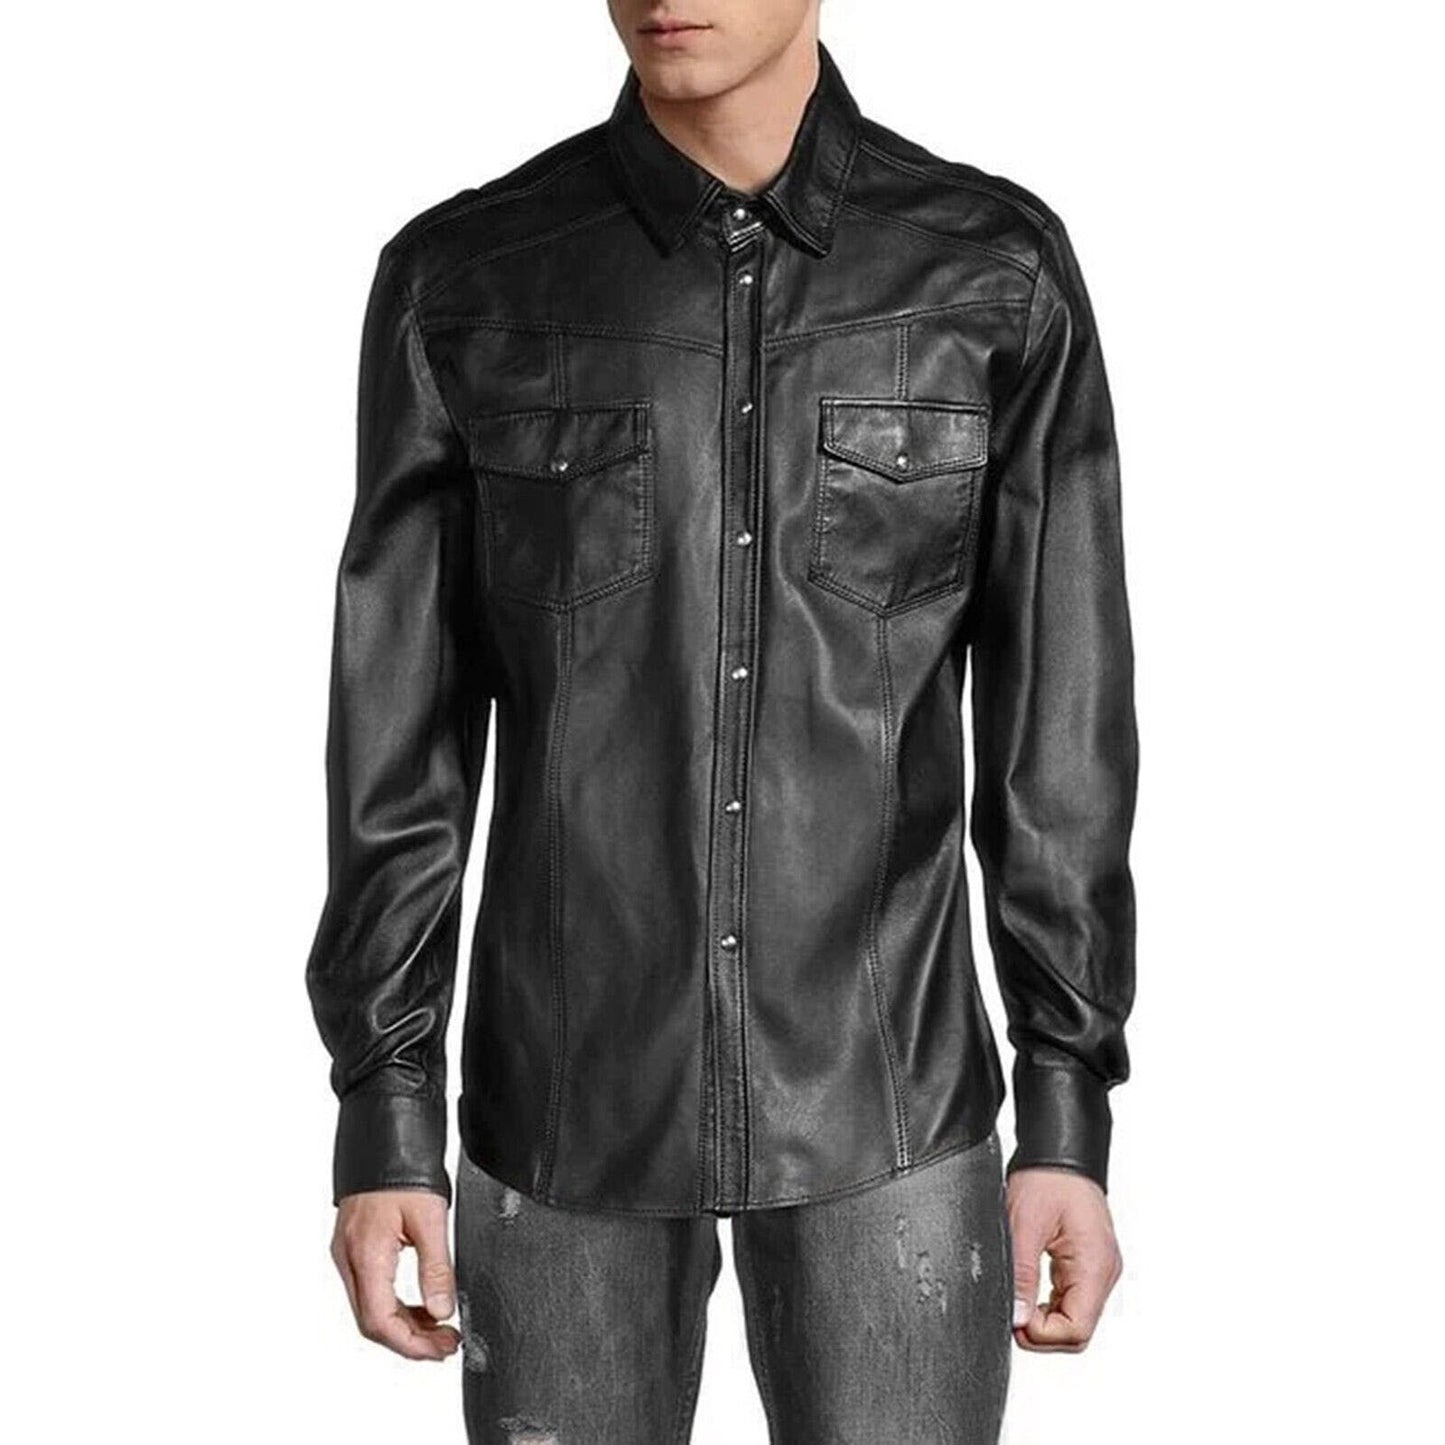 Men's Soft Real Leather Slim Fit Button-Up Shirt with Full Sleeves